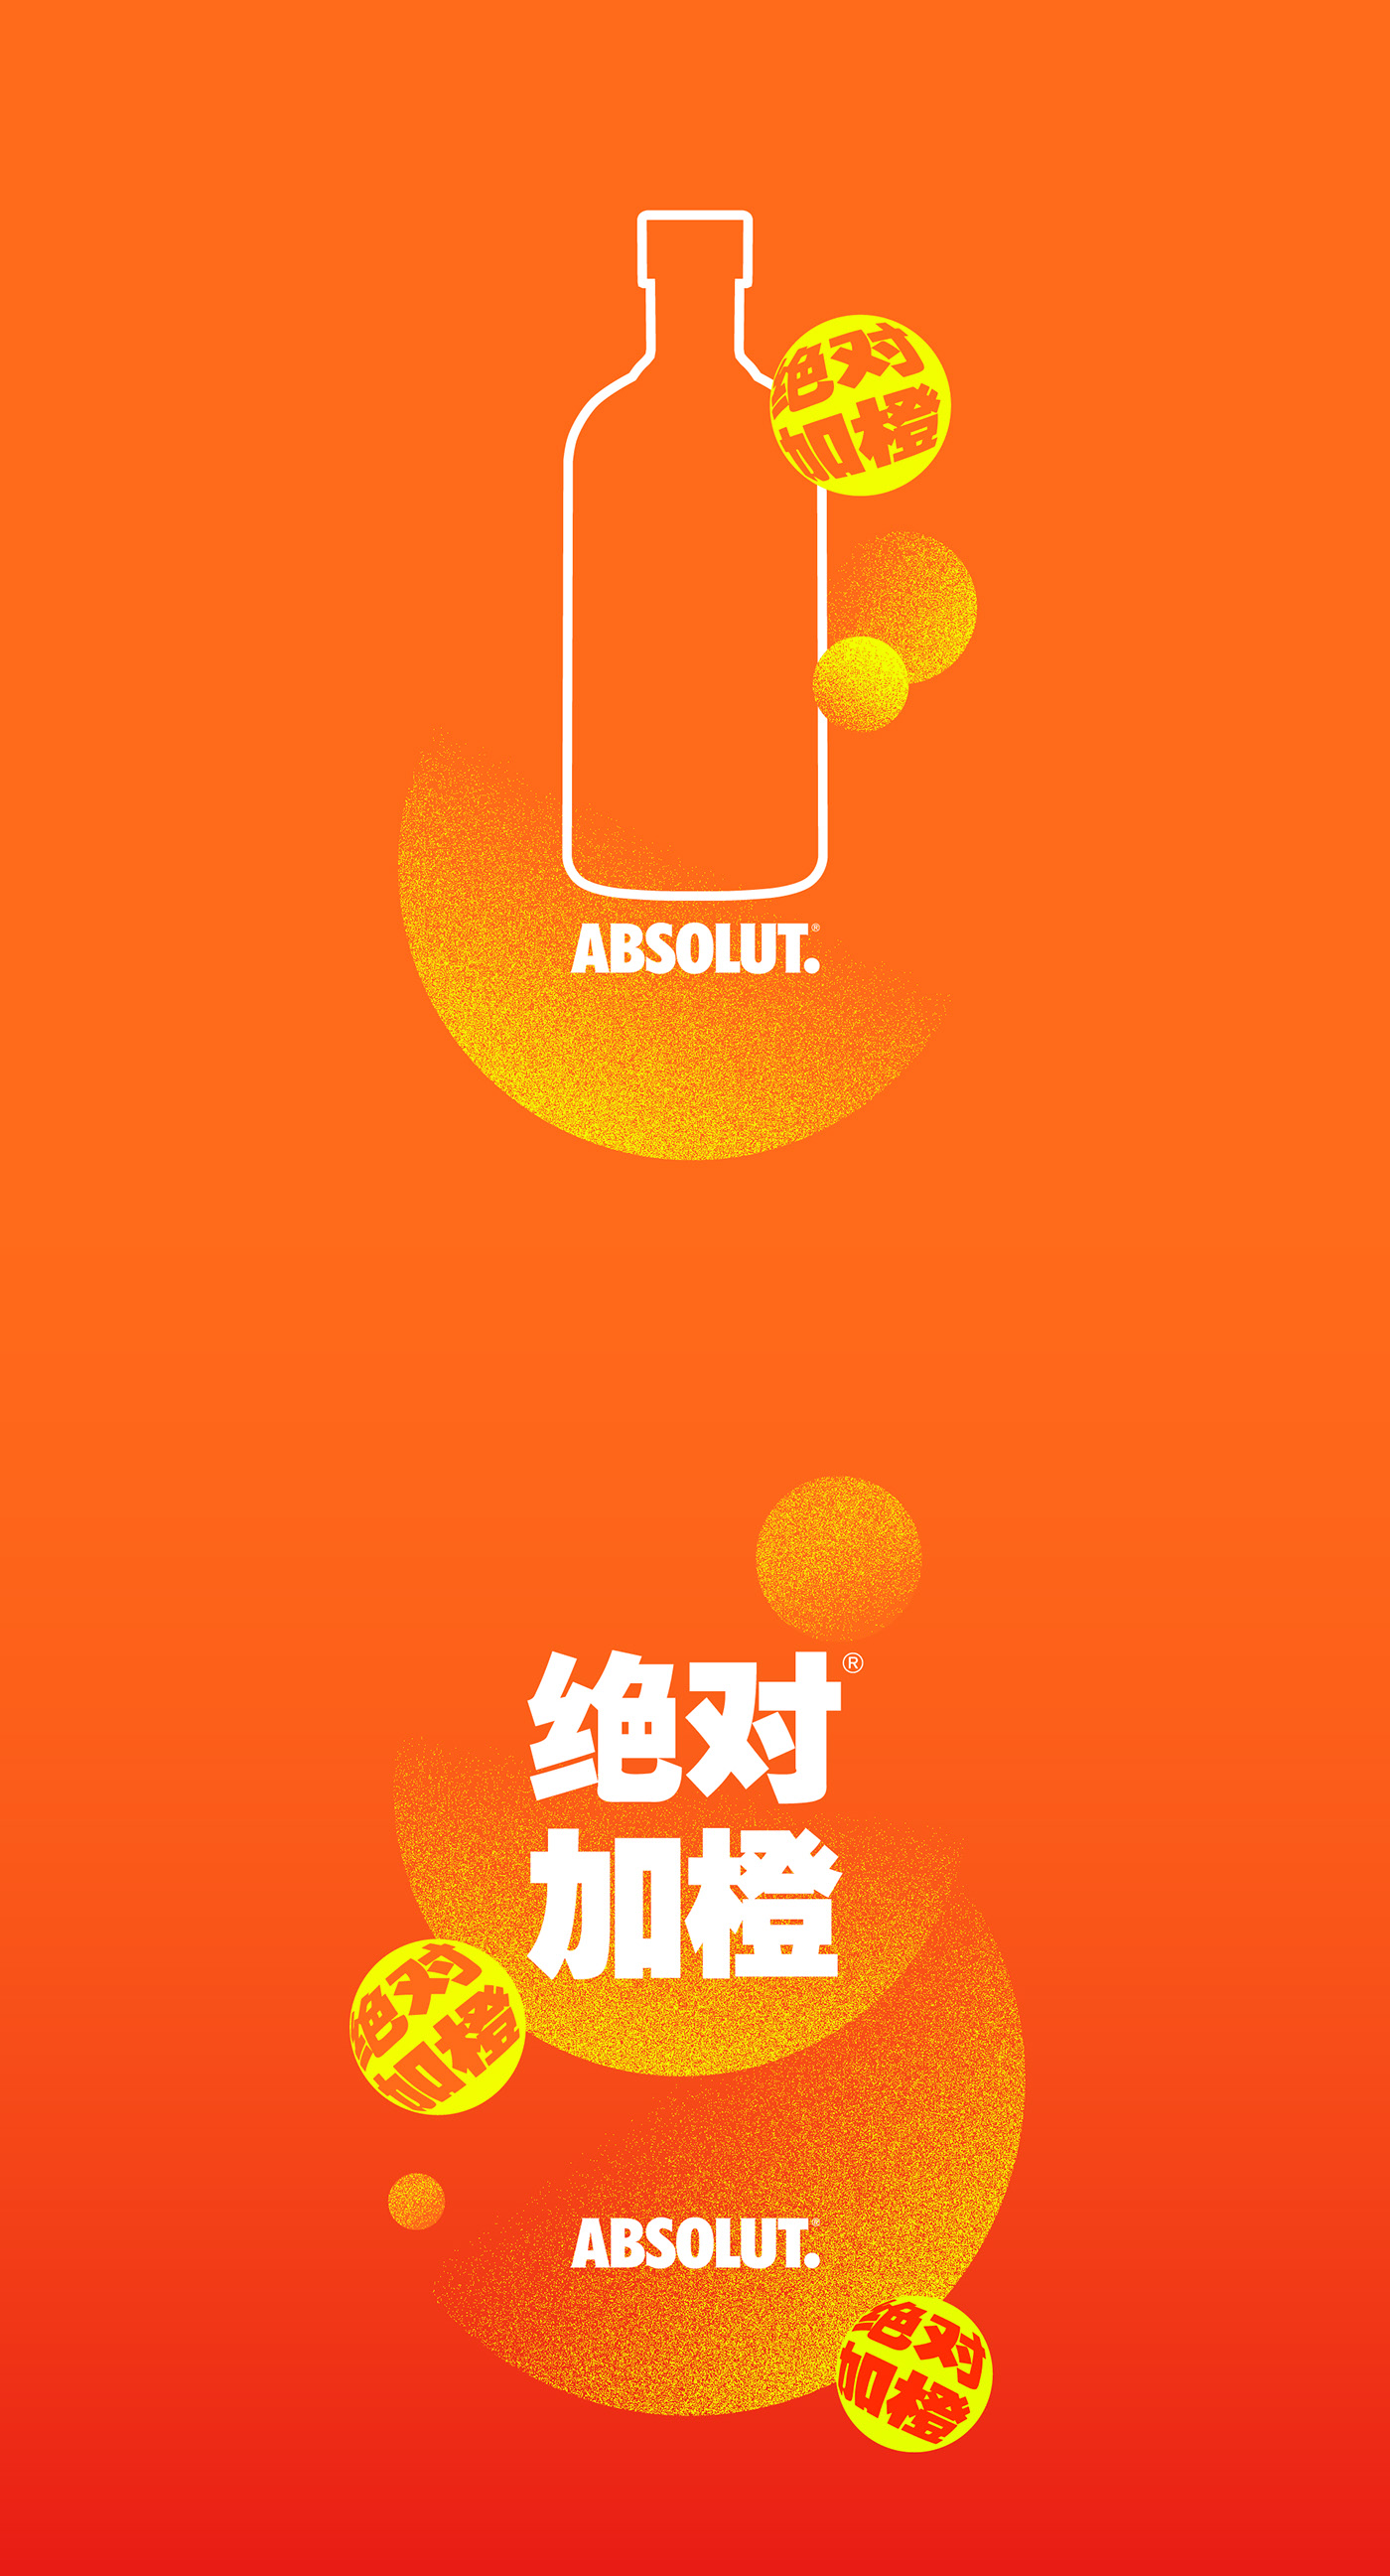 absolut can drink